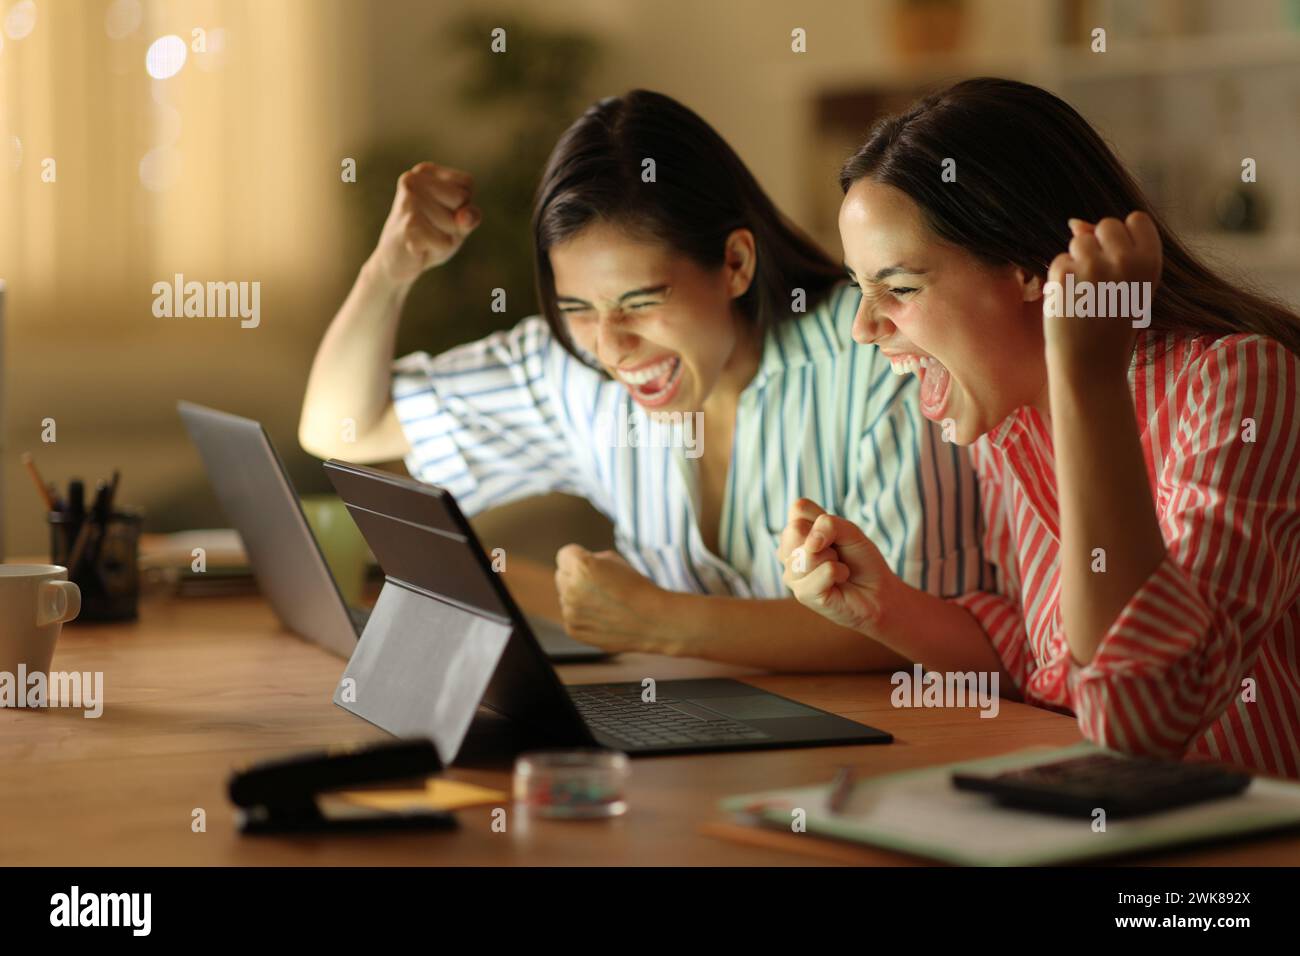 Excited tele workers celebrating online news in the night at home Stock Photo